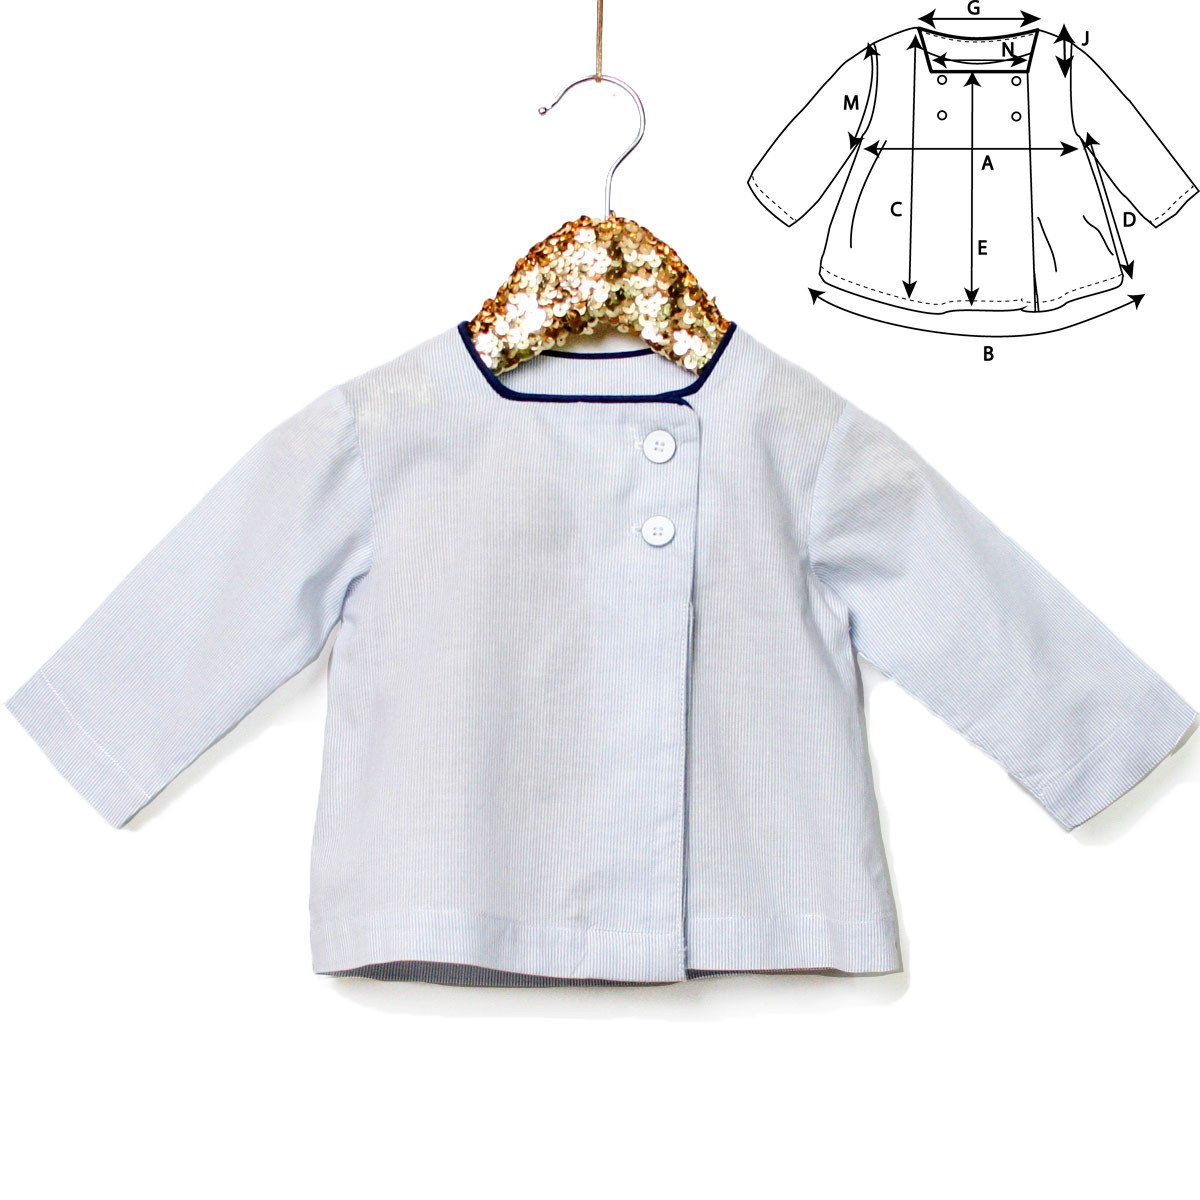 grind Misbruik taxi POLLUX square neckline Blouse - Newborn - PDF Sewing Pattern – Ikatee  sewing patterns